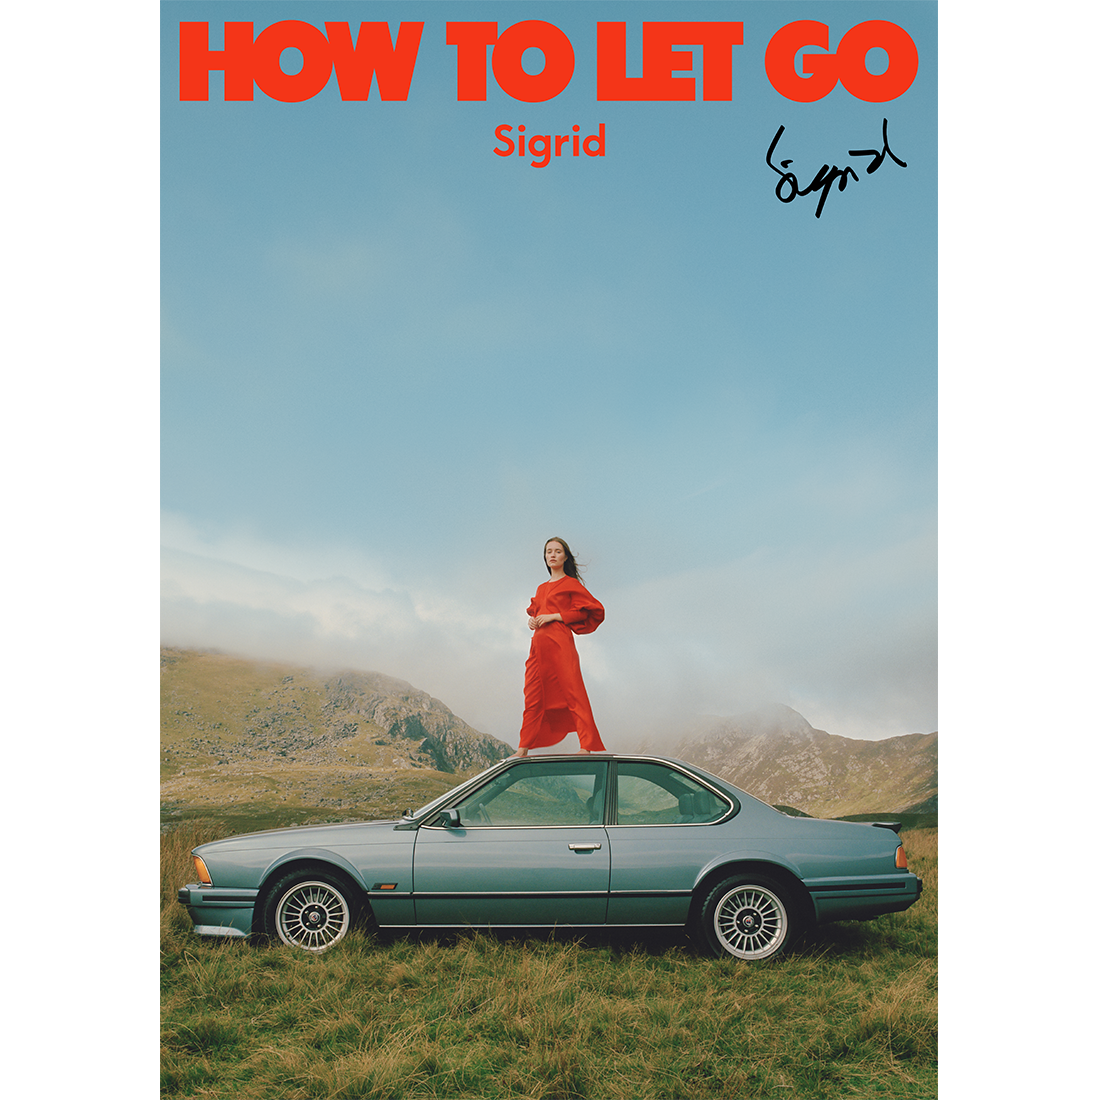 How To Let Go (Special Edition): Limited Blue Vinyl 2LP + Signed Poster